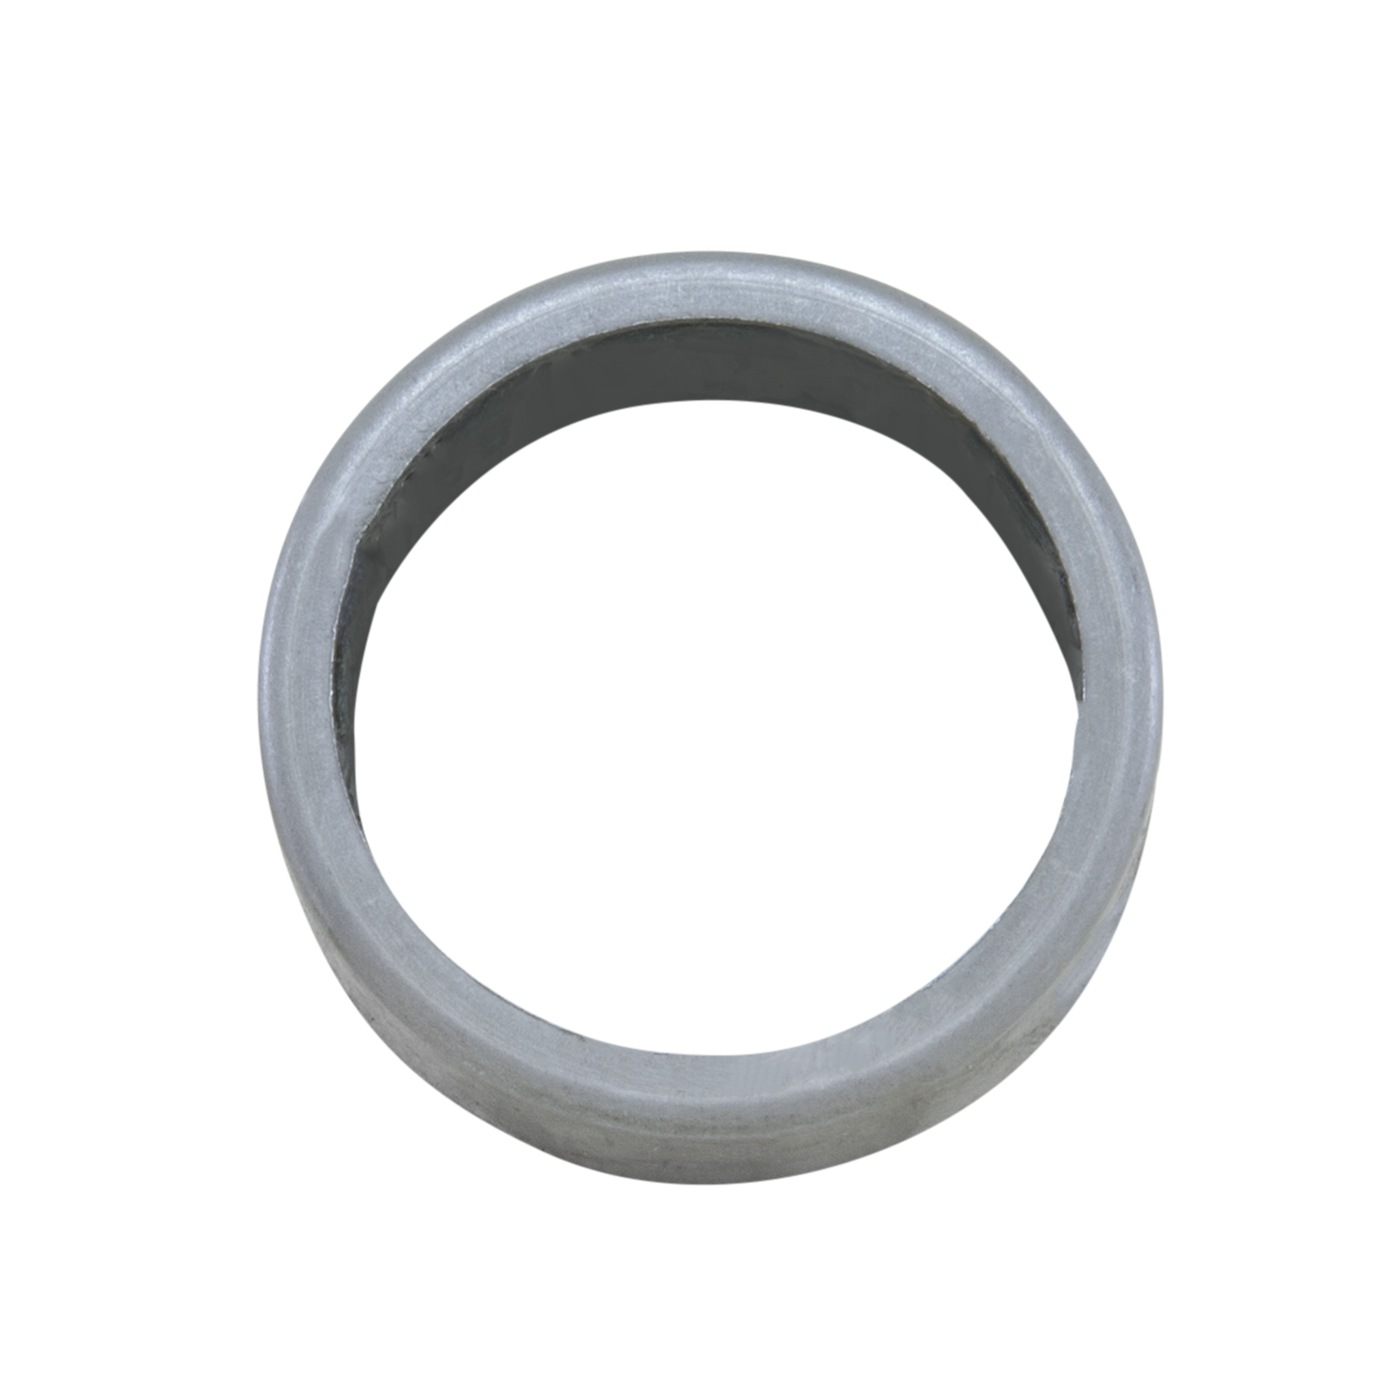 Spindle nut washer for Dana 50 & 60, 2" I.D.